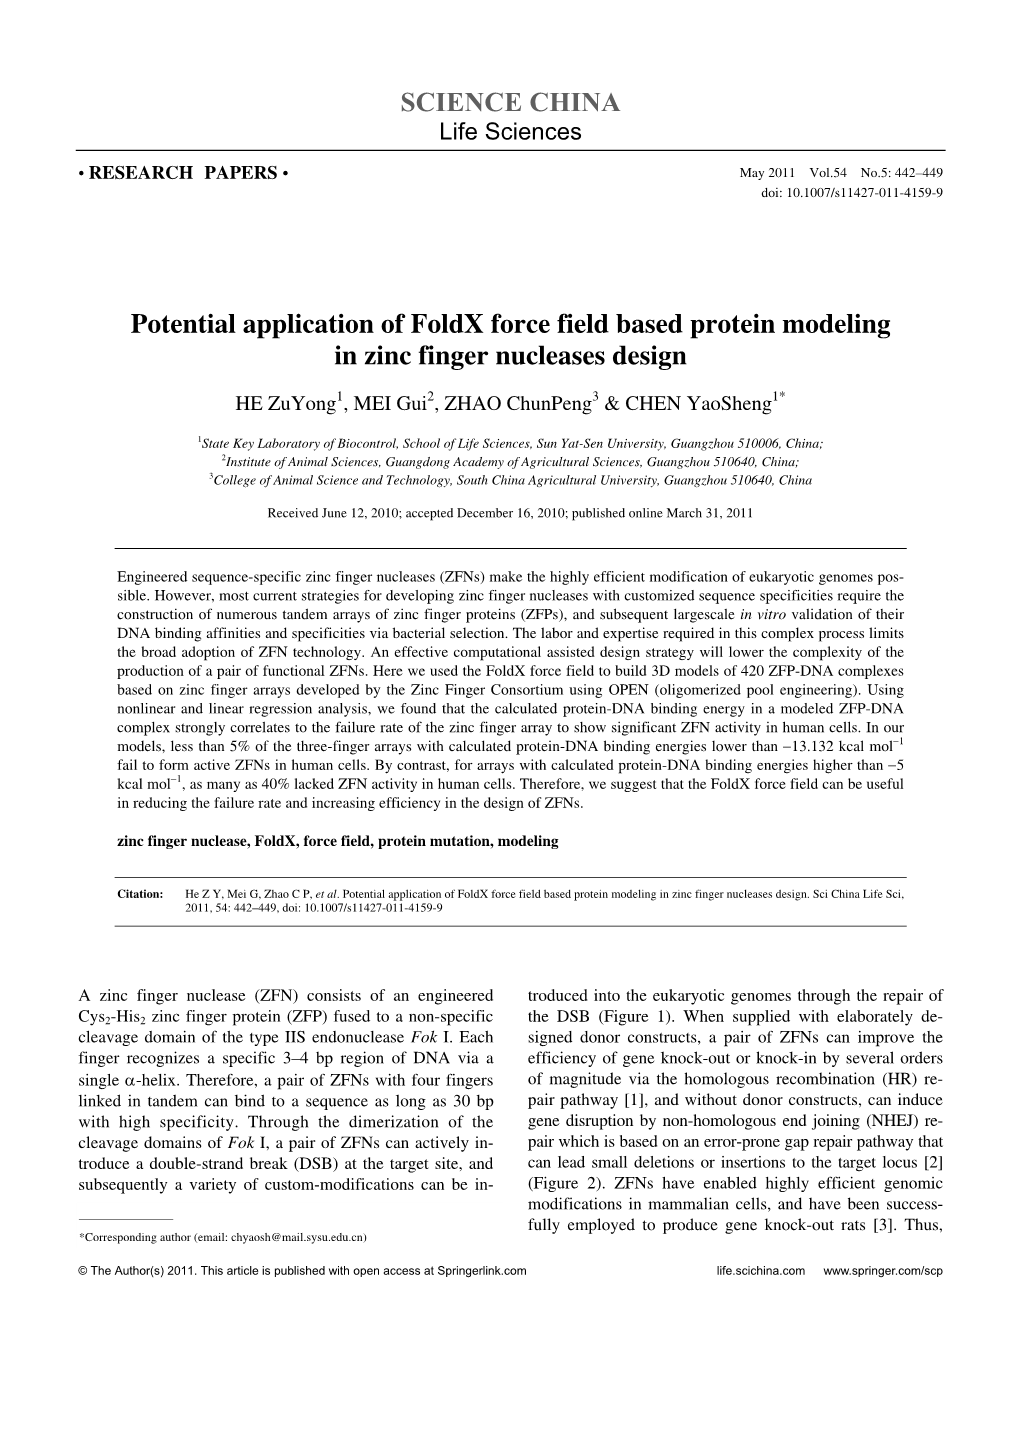 Potential Application of Foldx Force Field Based Protein Modeling in Zinc Finger Nucleases Design